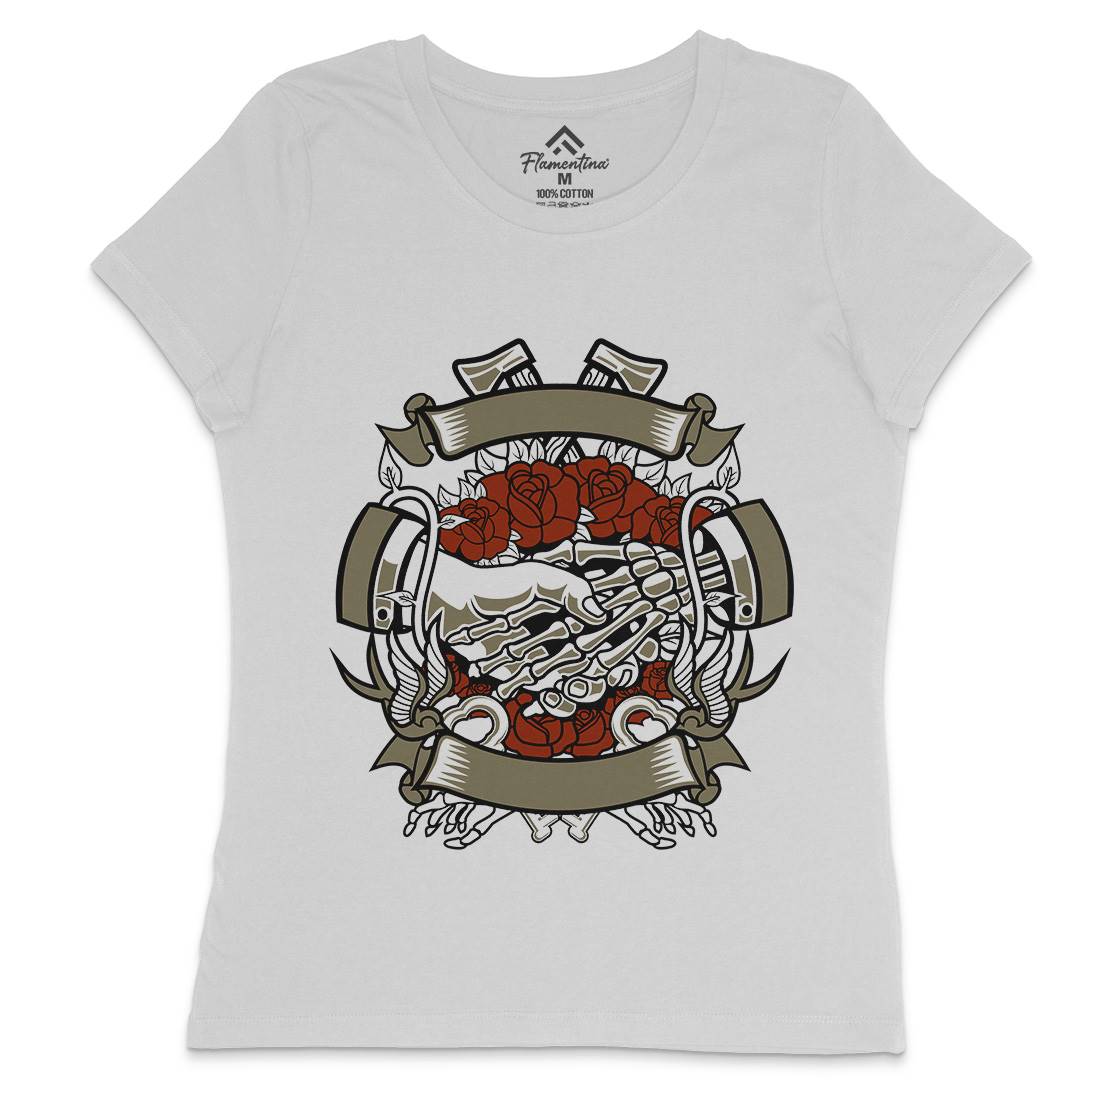 Otherside Womens Crew Neck T-Shirt Religion A103